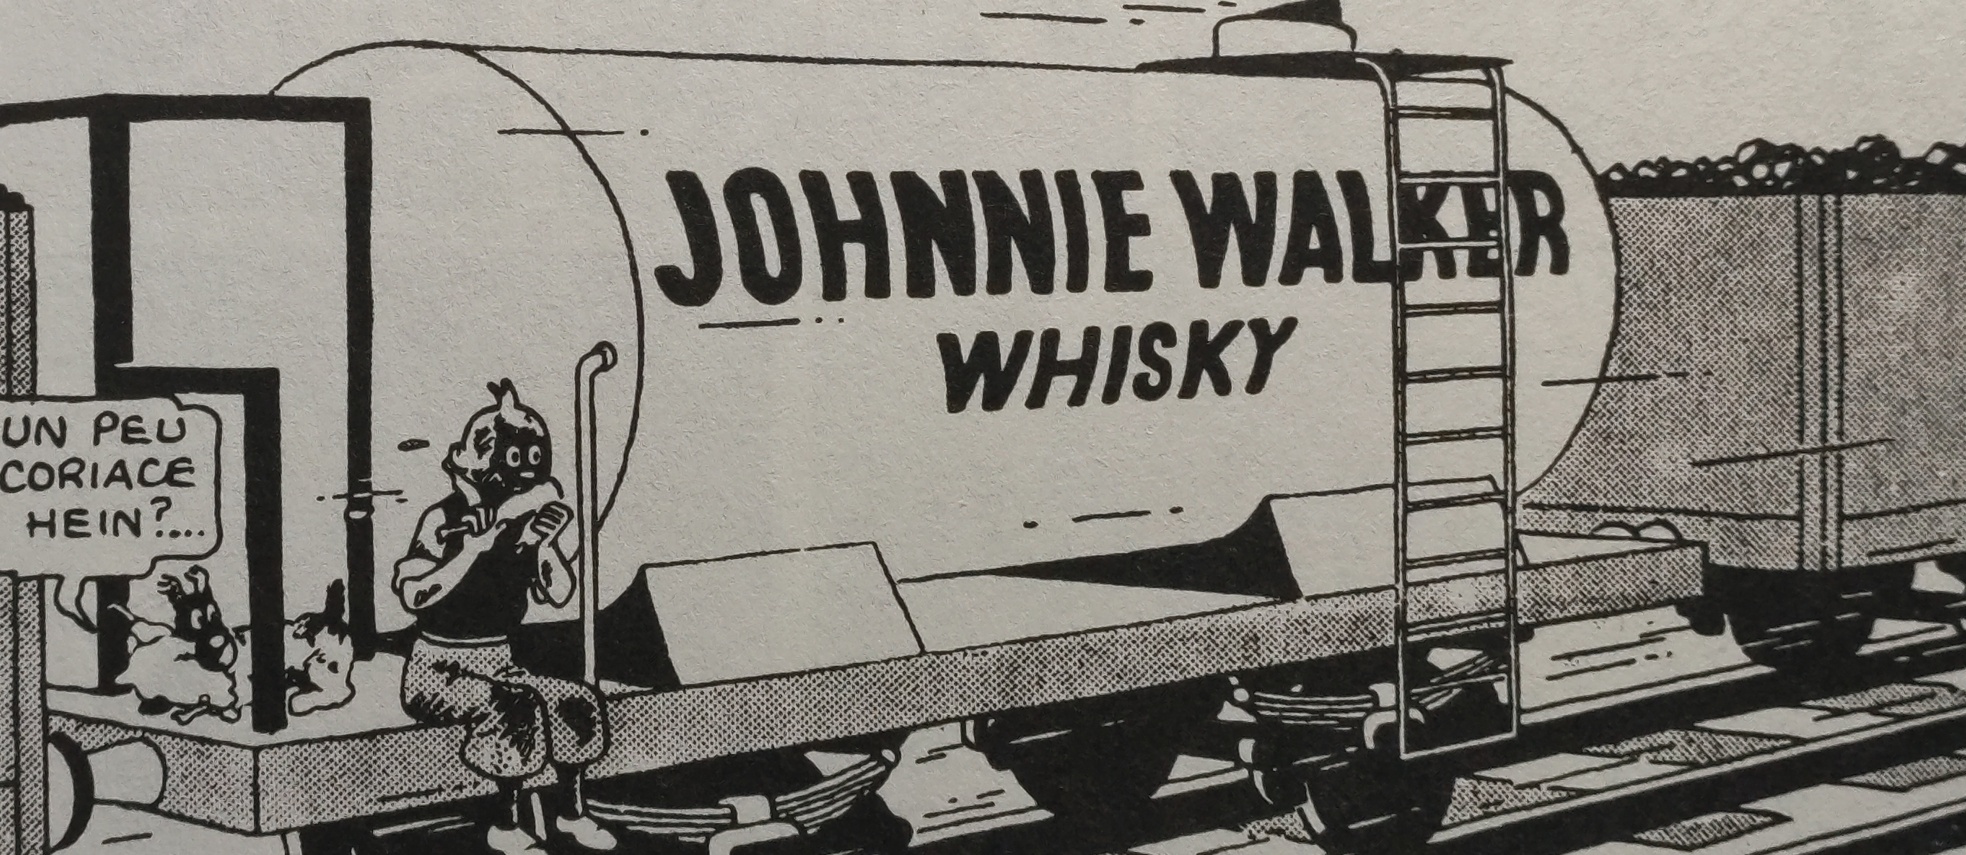 The Johnnie Walker tanker in the original edition of The Black Island